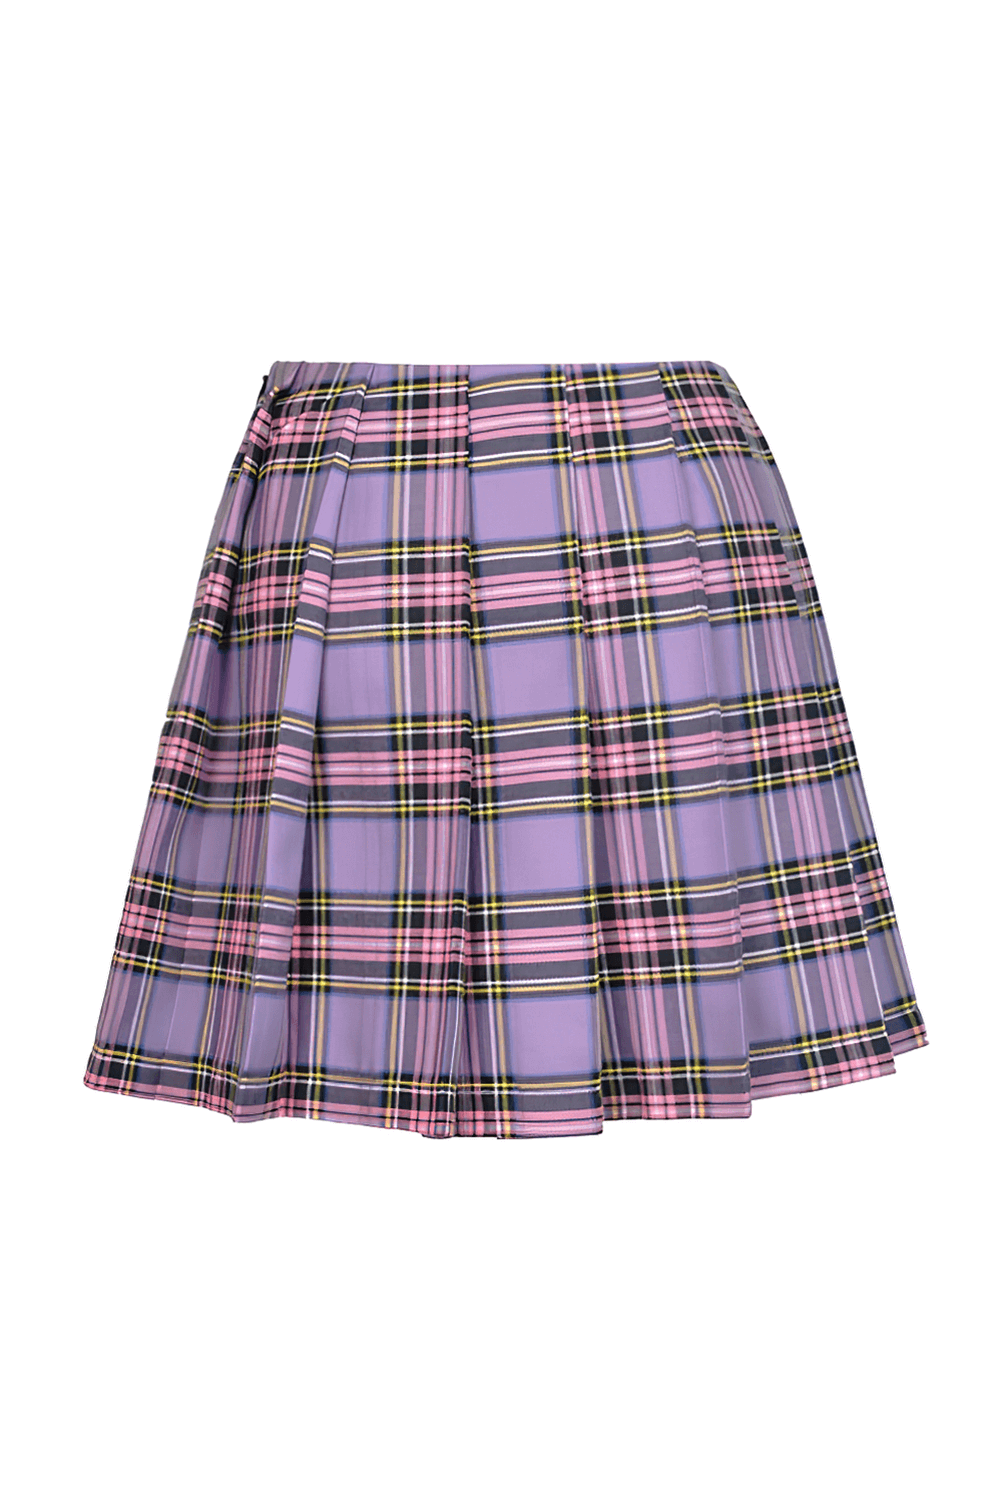 Grunge Women's Pleated Mini Skirt with Chain Detail